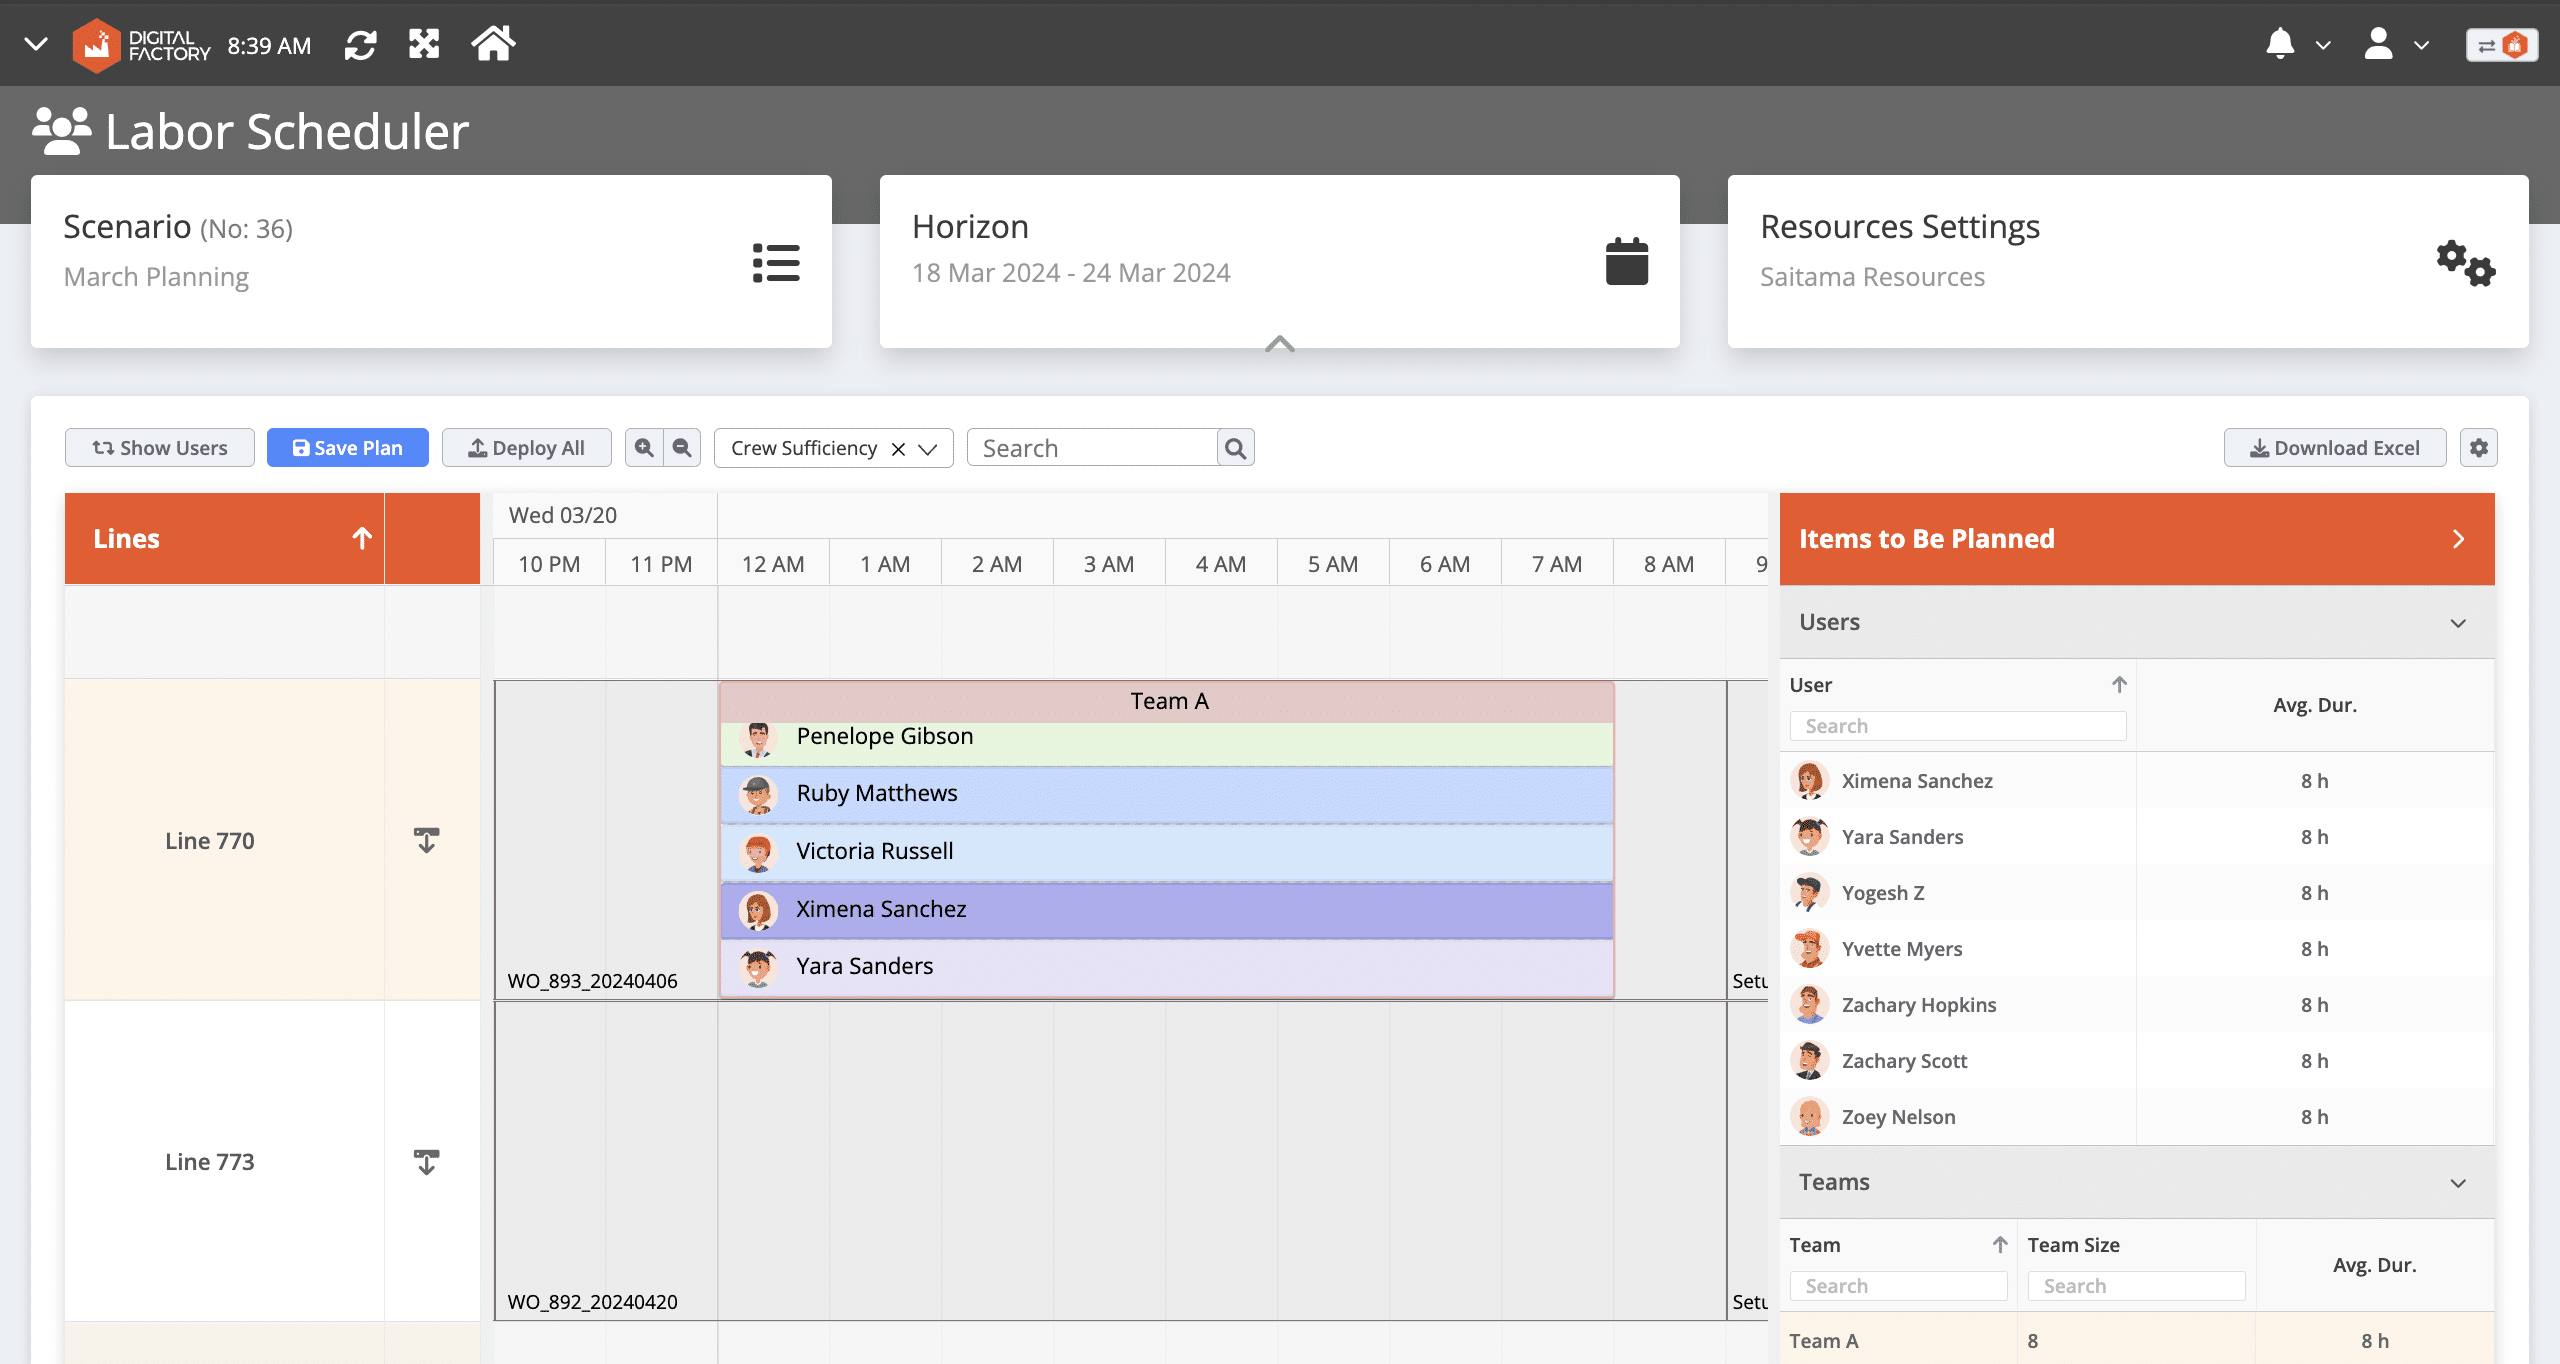 Image shows Labor Scheduler allows users to generate teams and allocate them lines as a unit.